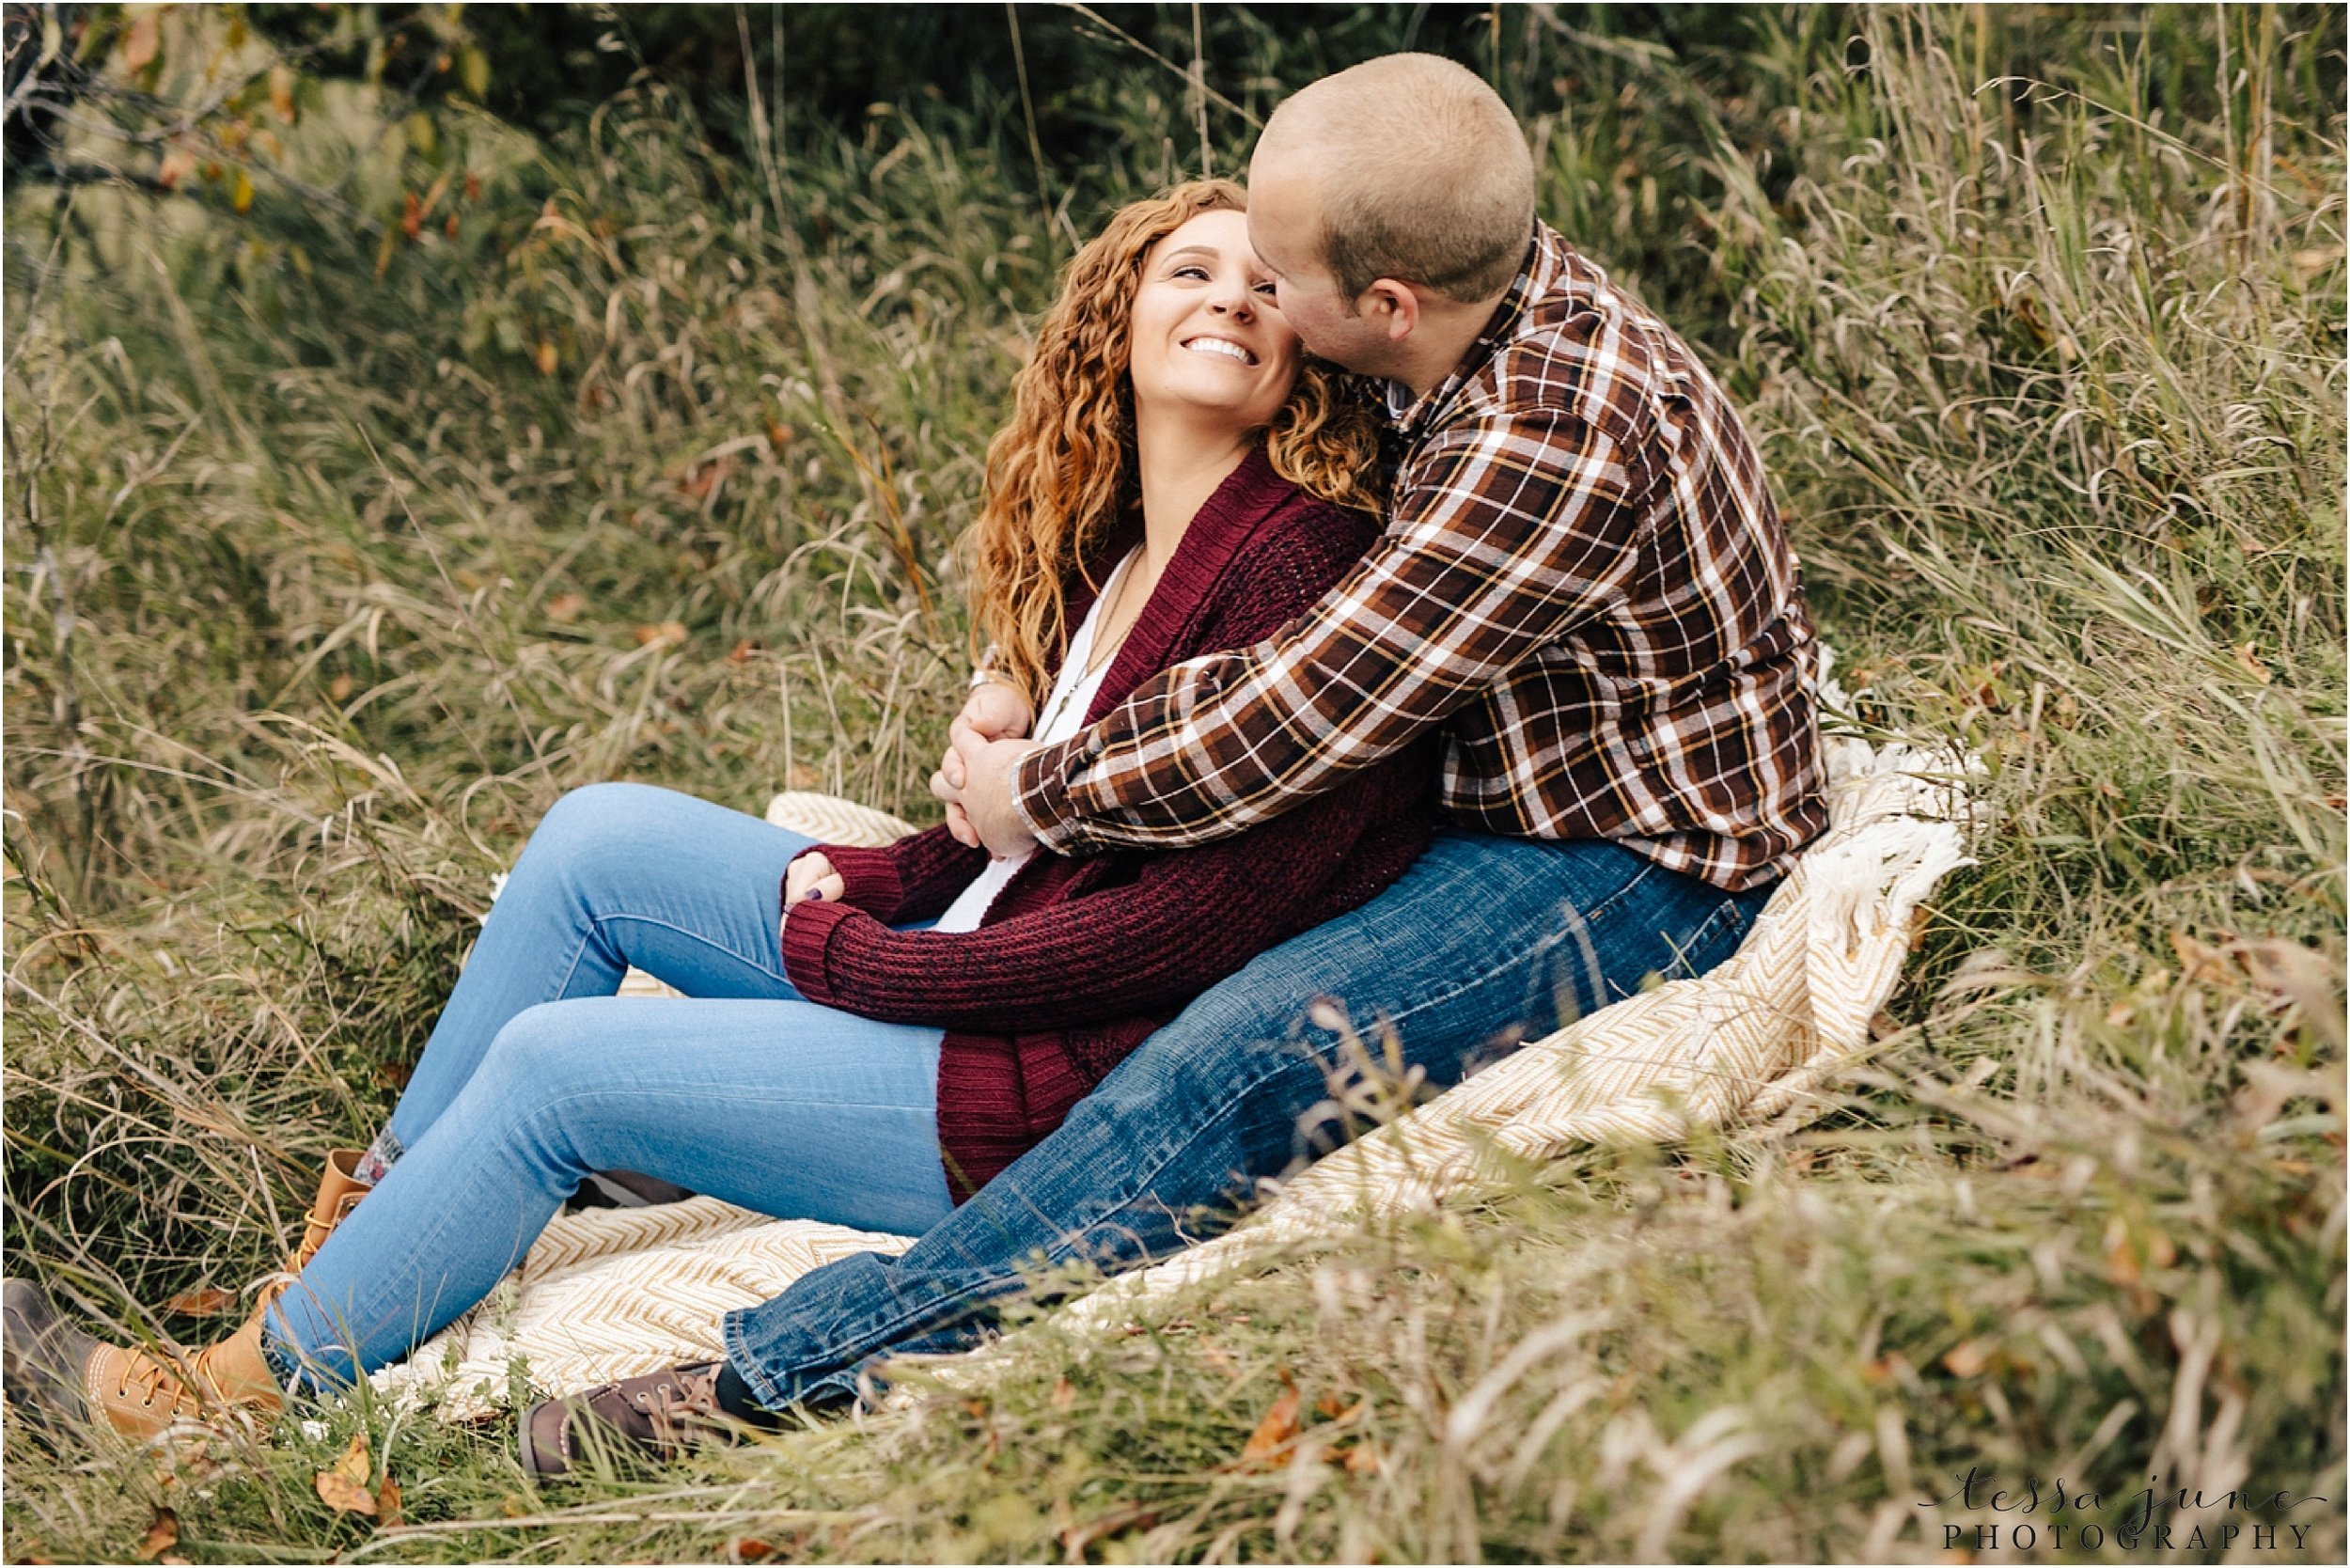 st-cloud-wedding-photographer-lake-maria-engagement-in-the-fall-25.jpg